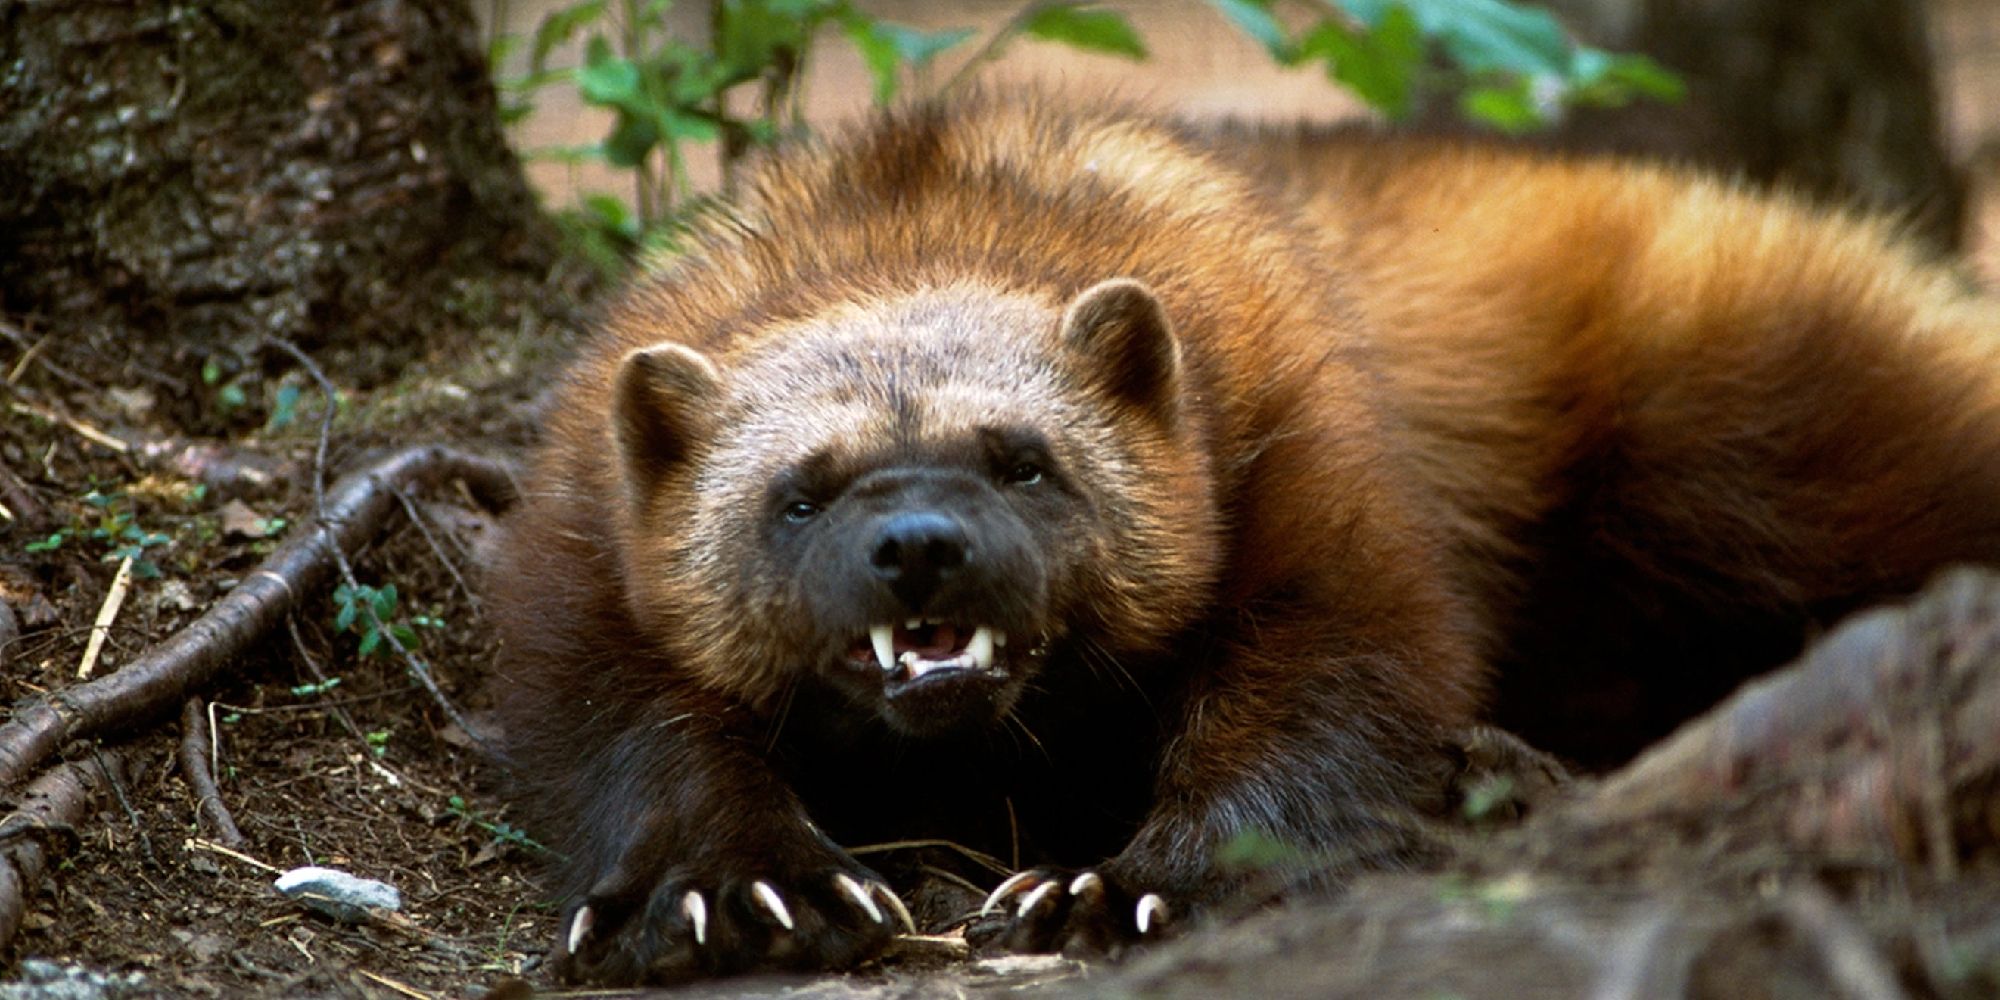 A wolverine baring its claws and teeth in a forest